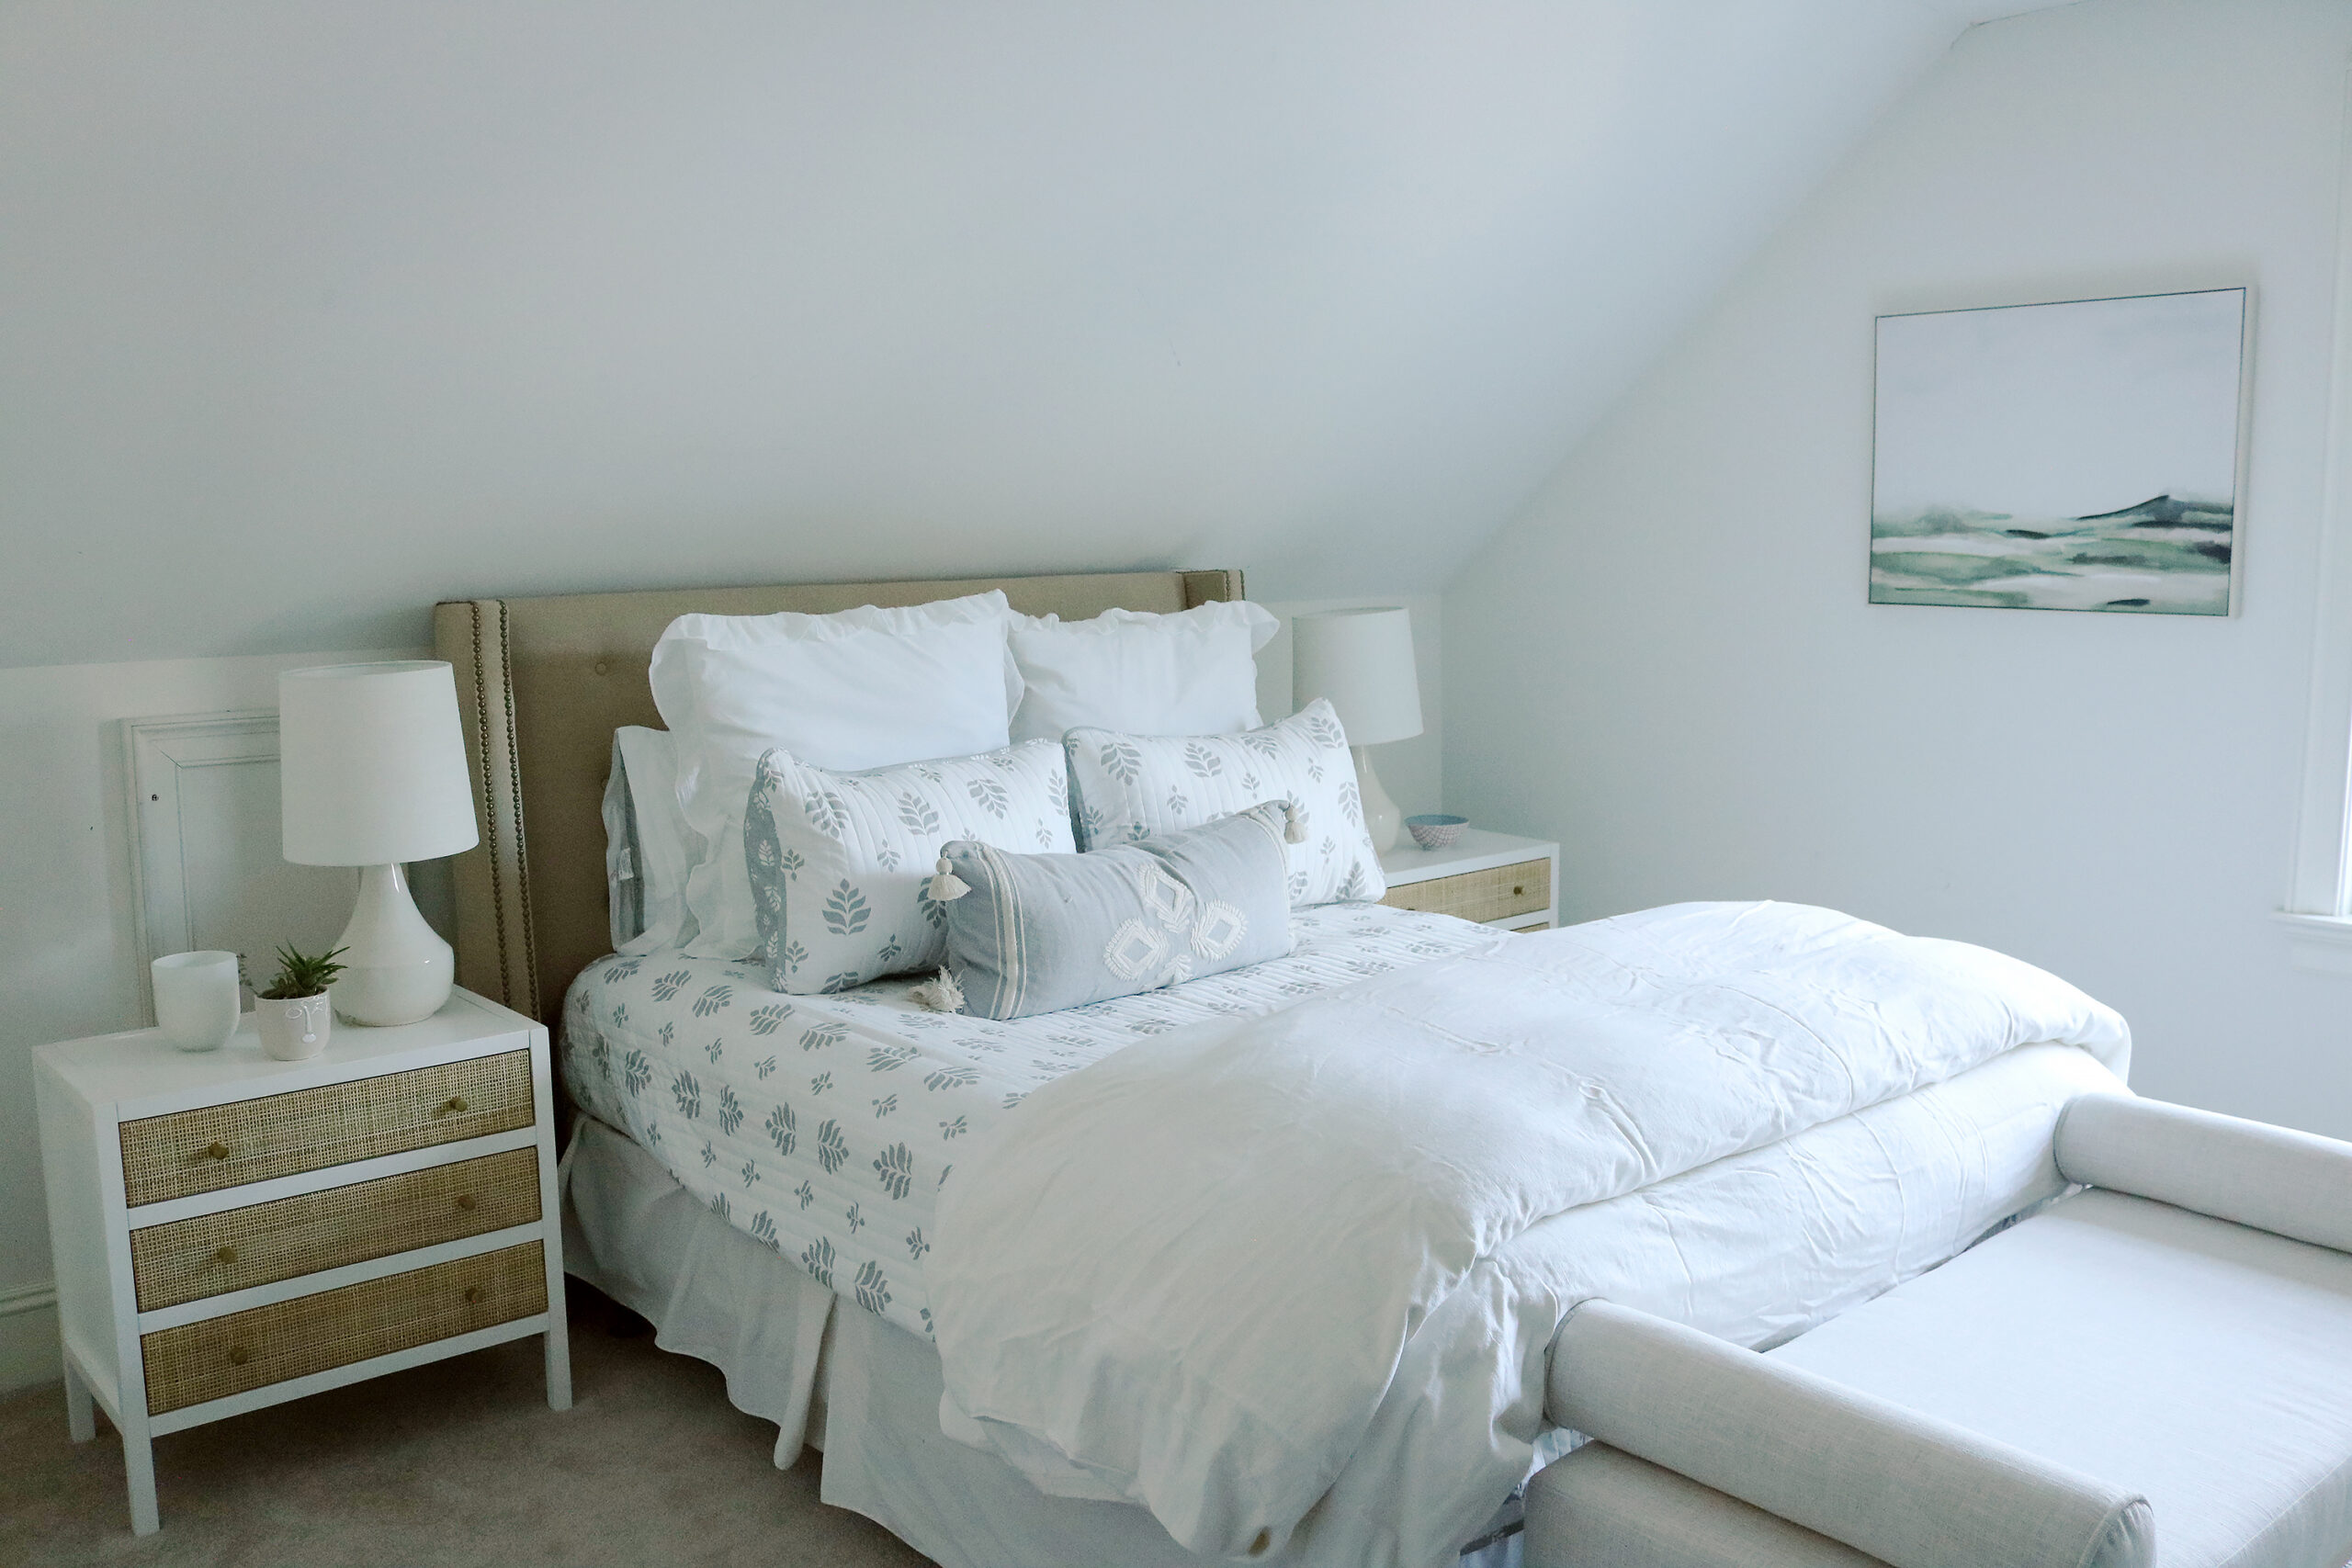 An instant Guest bedroom update with New Bedding, Lamp and Artwork. This will make the room inviting and a place where guests feel welcomed. || Darling Darleen Top Lifestyle Blogger